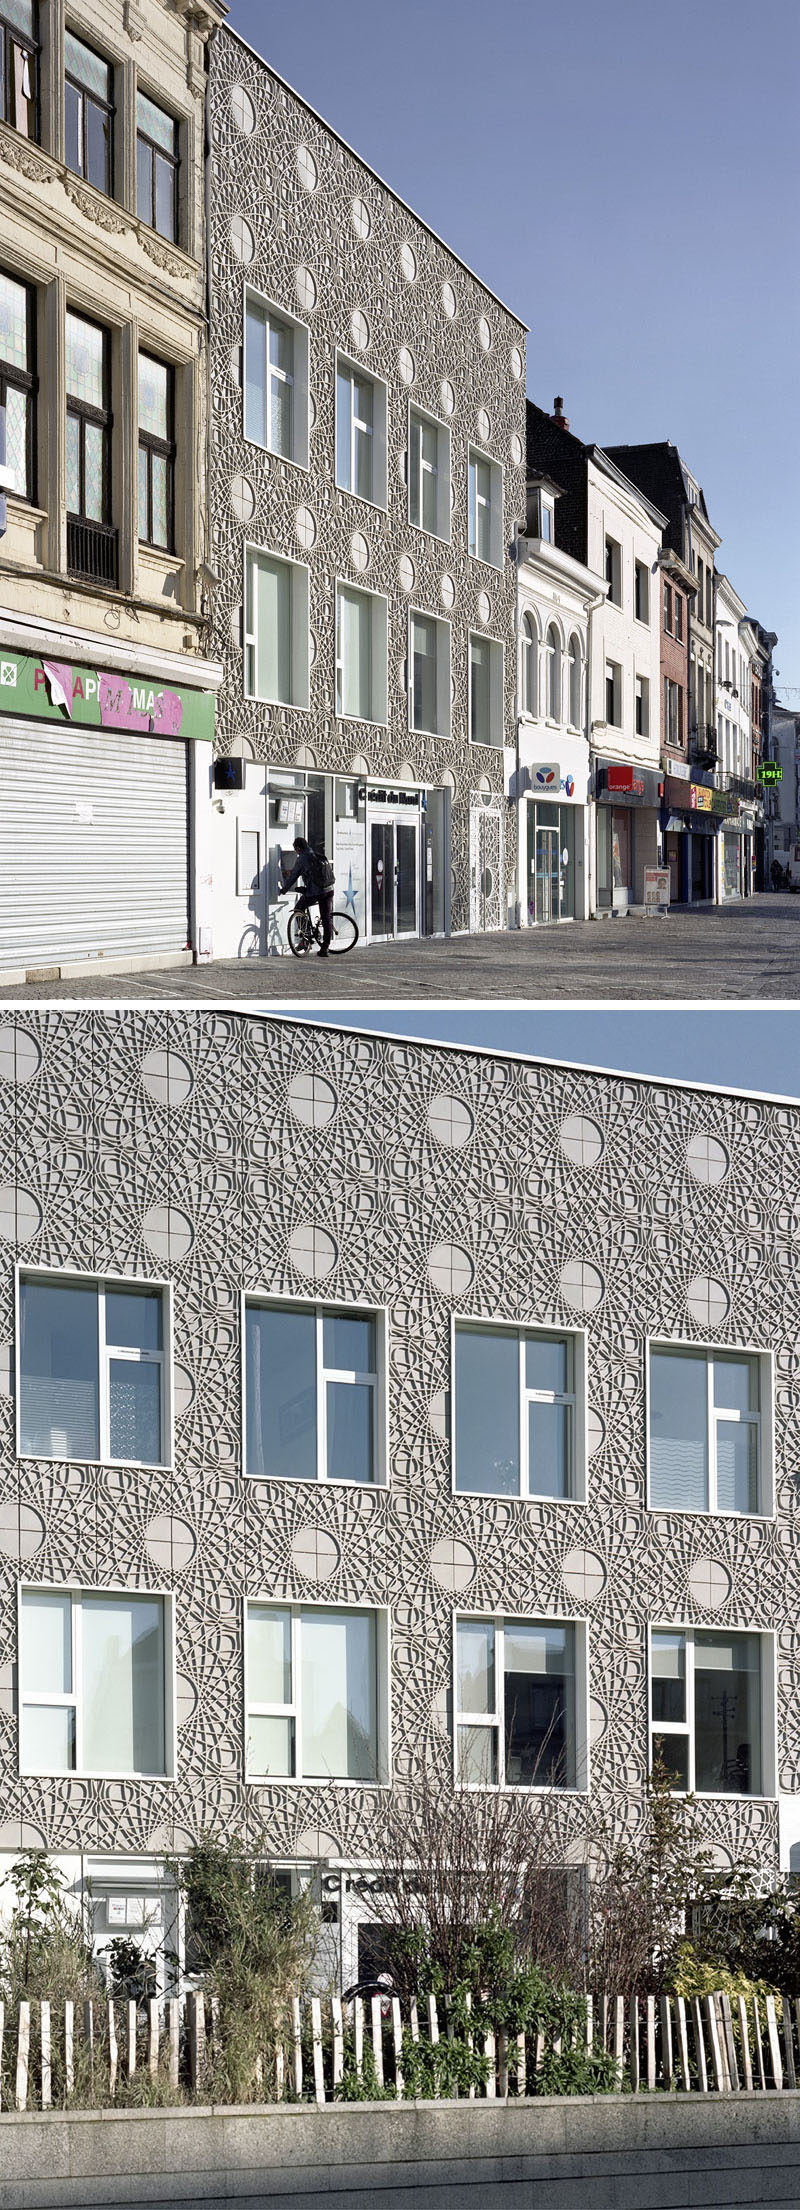 This building facade is made up of decorative concrete panels inspired by a pattern found on bank notes.